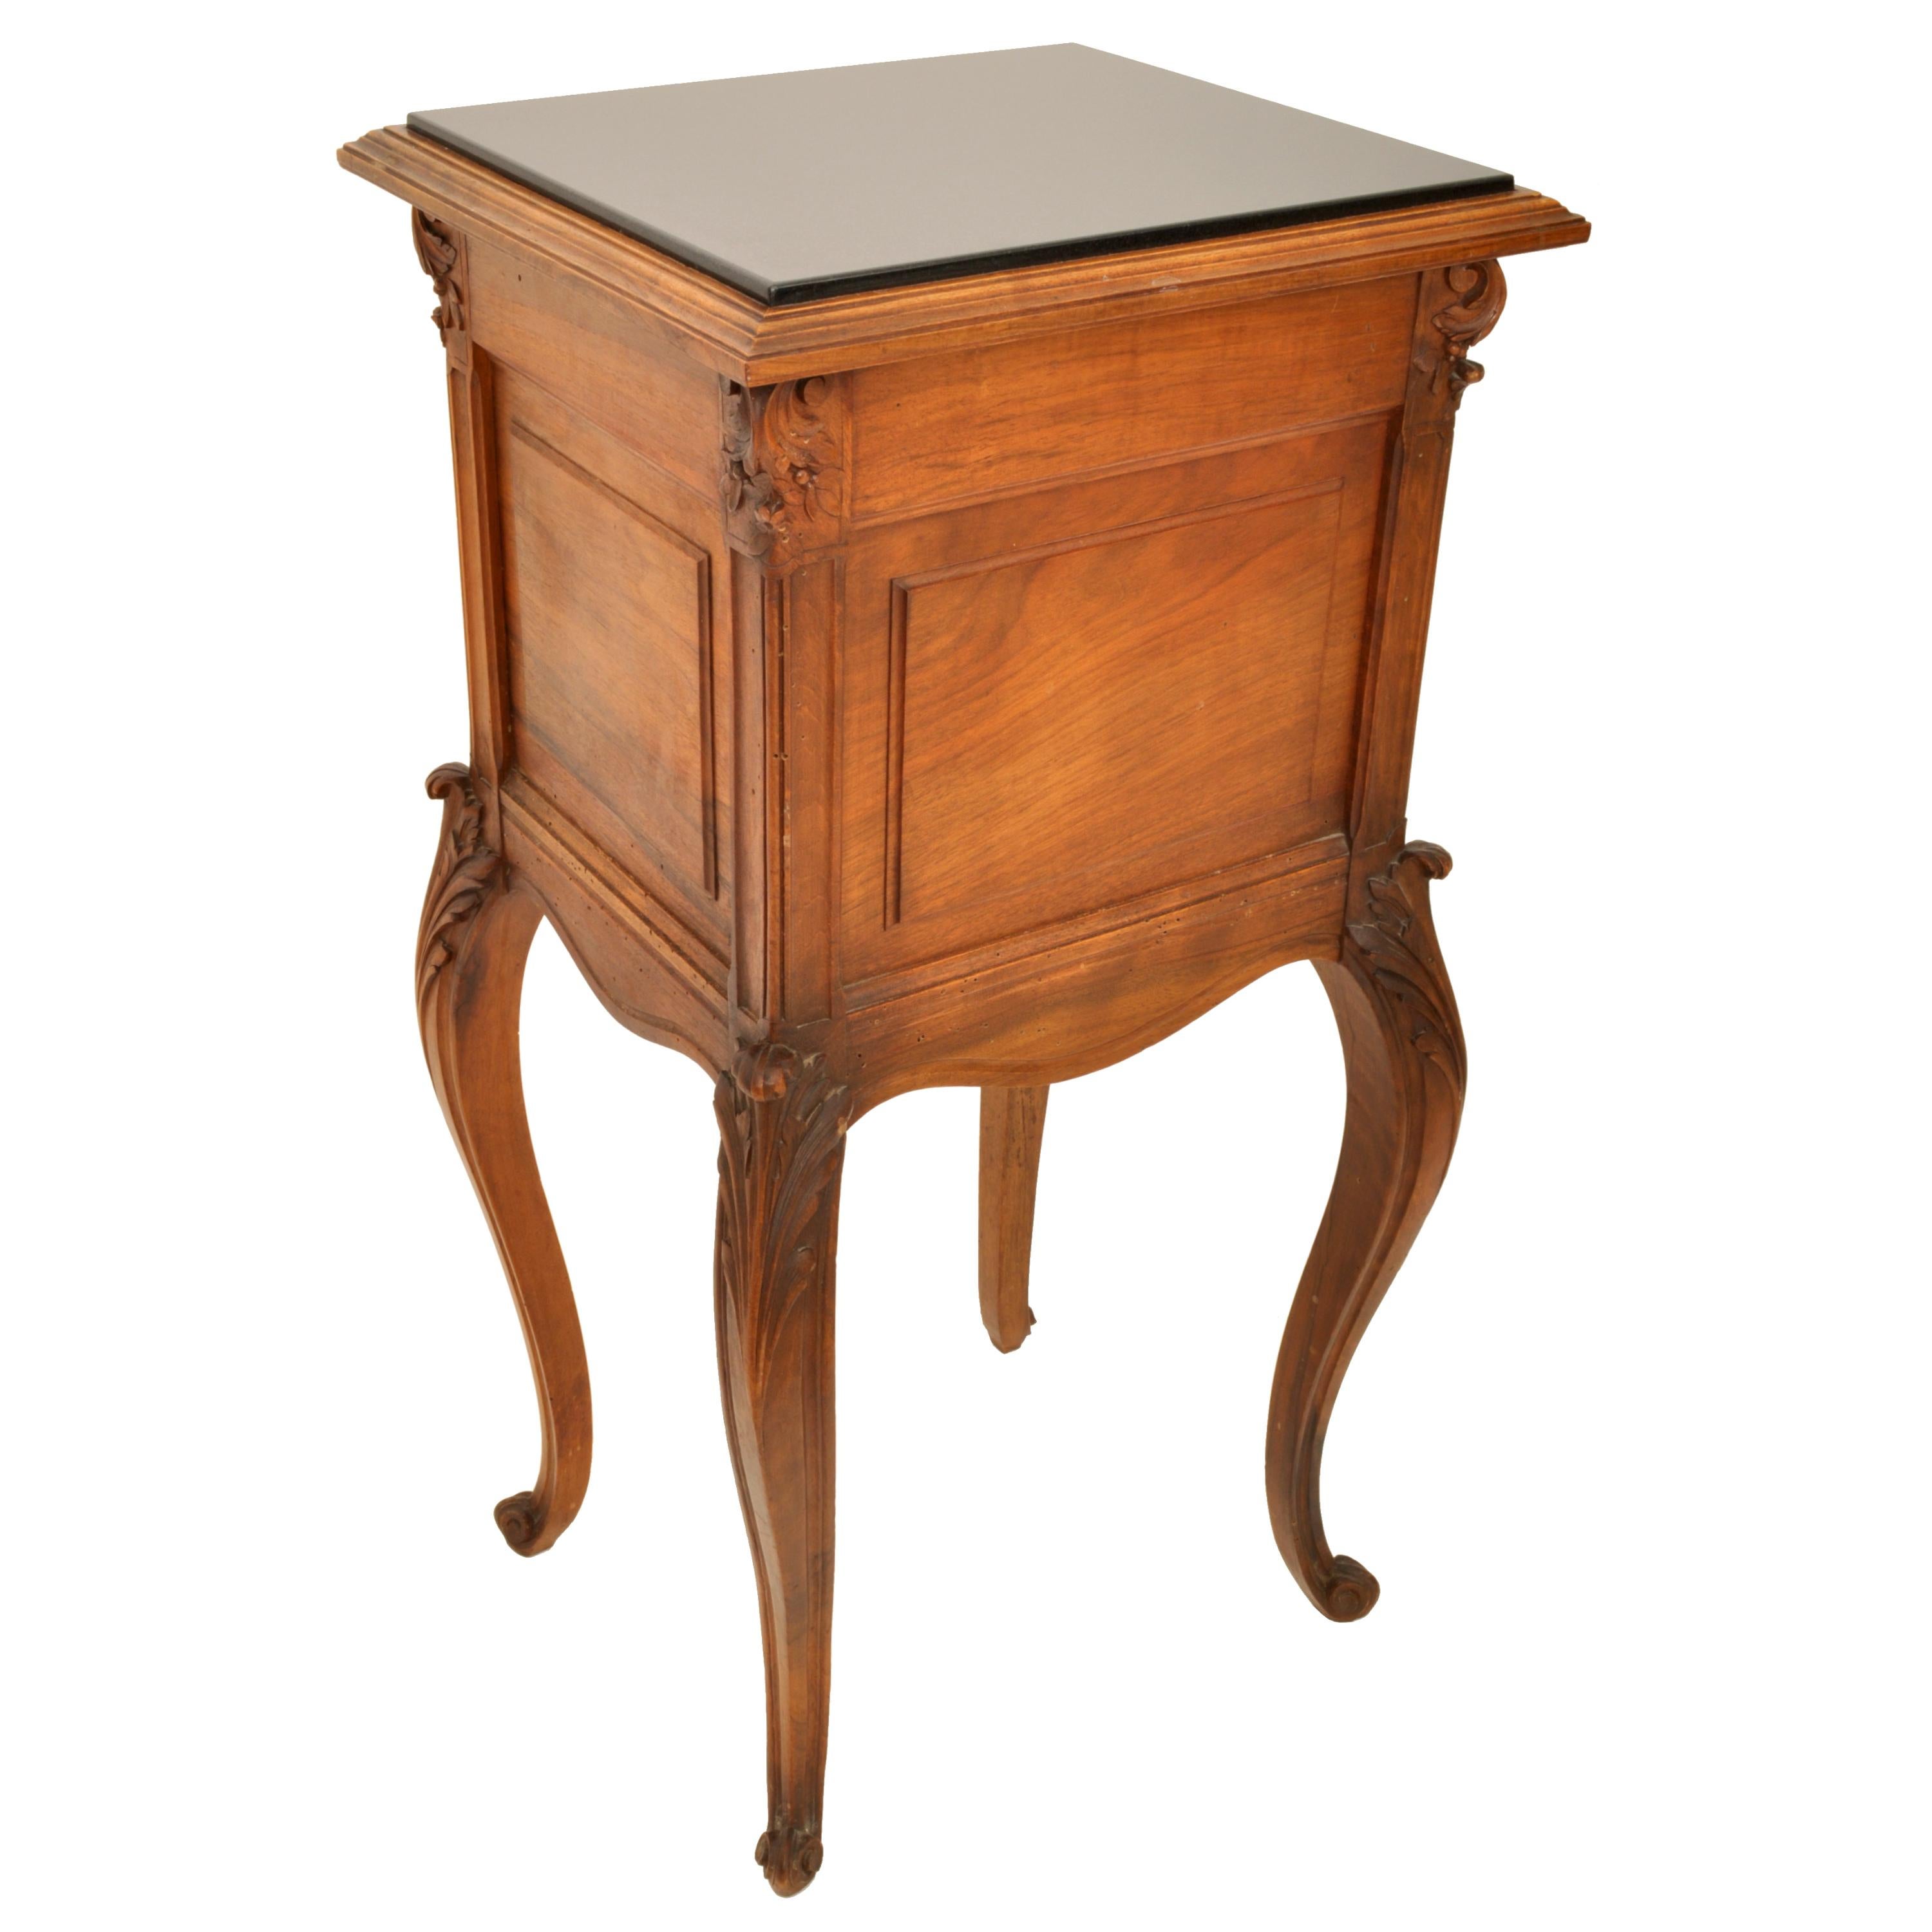 Antique French Provincial Louis XVI Carved Walnut & Marble Nightstand Table 1880 For Sale 5